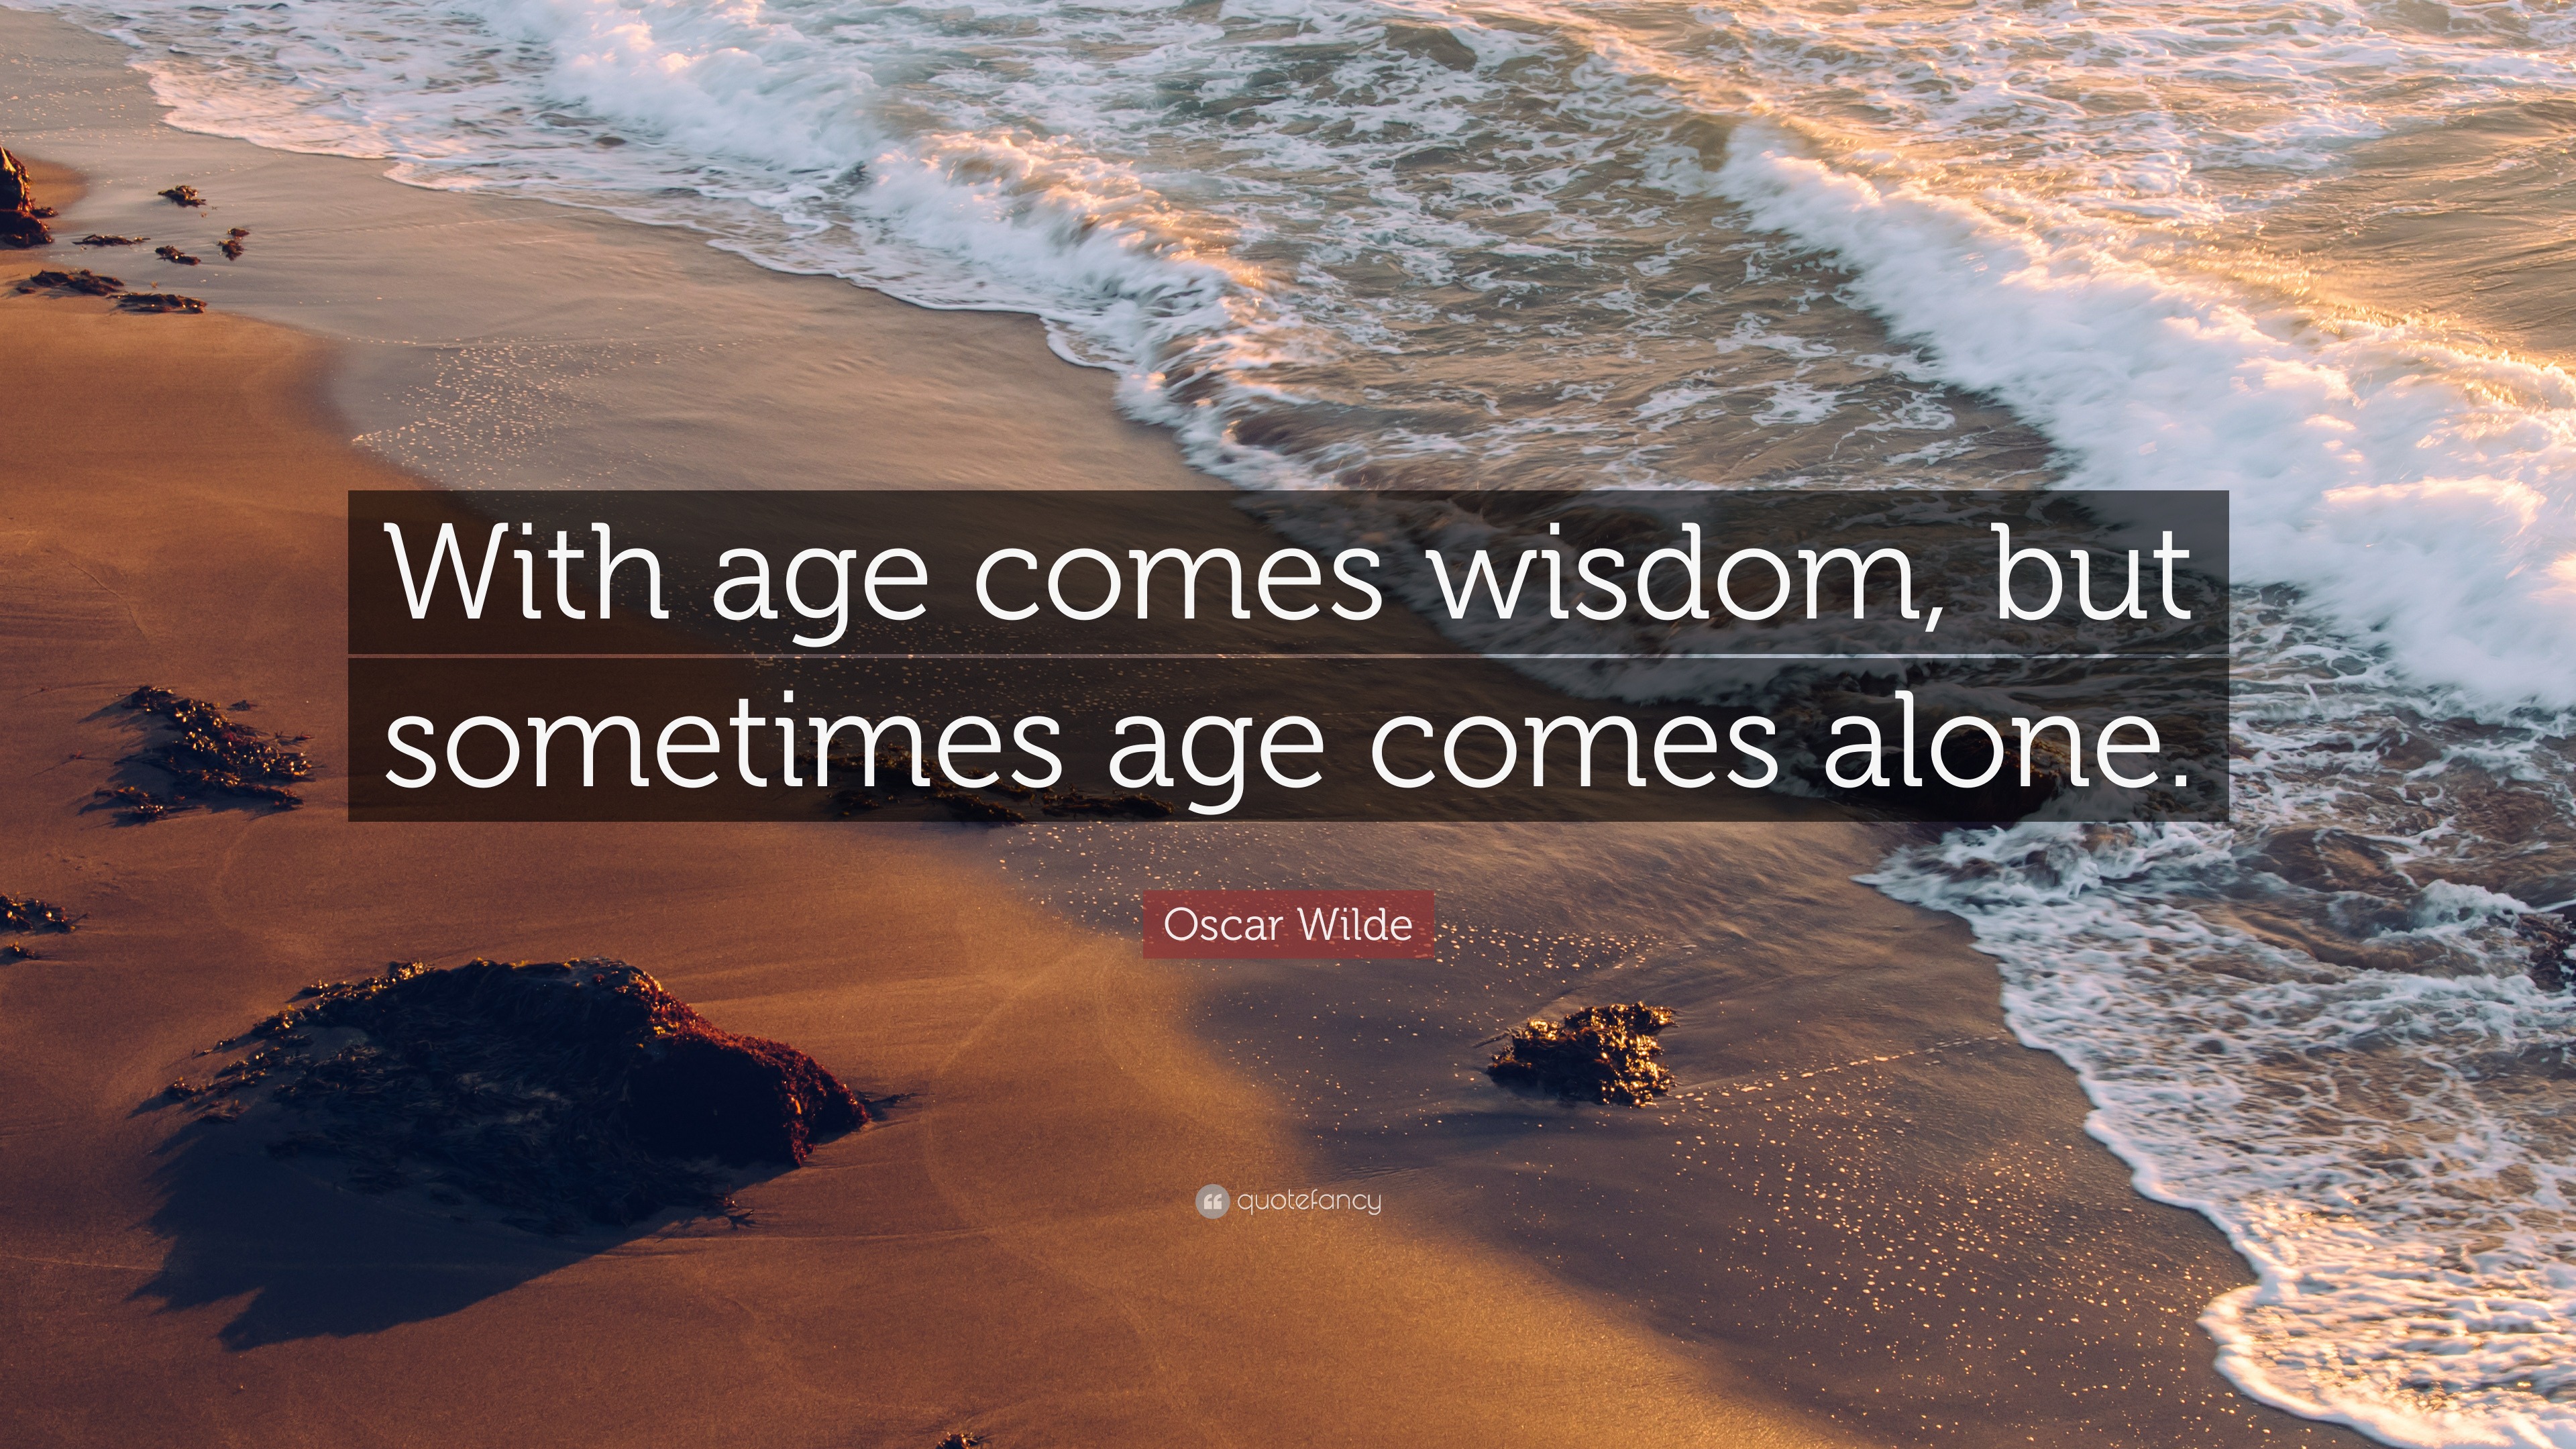 jacki long: Day 3152: With age comes wisdom.